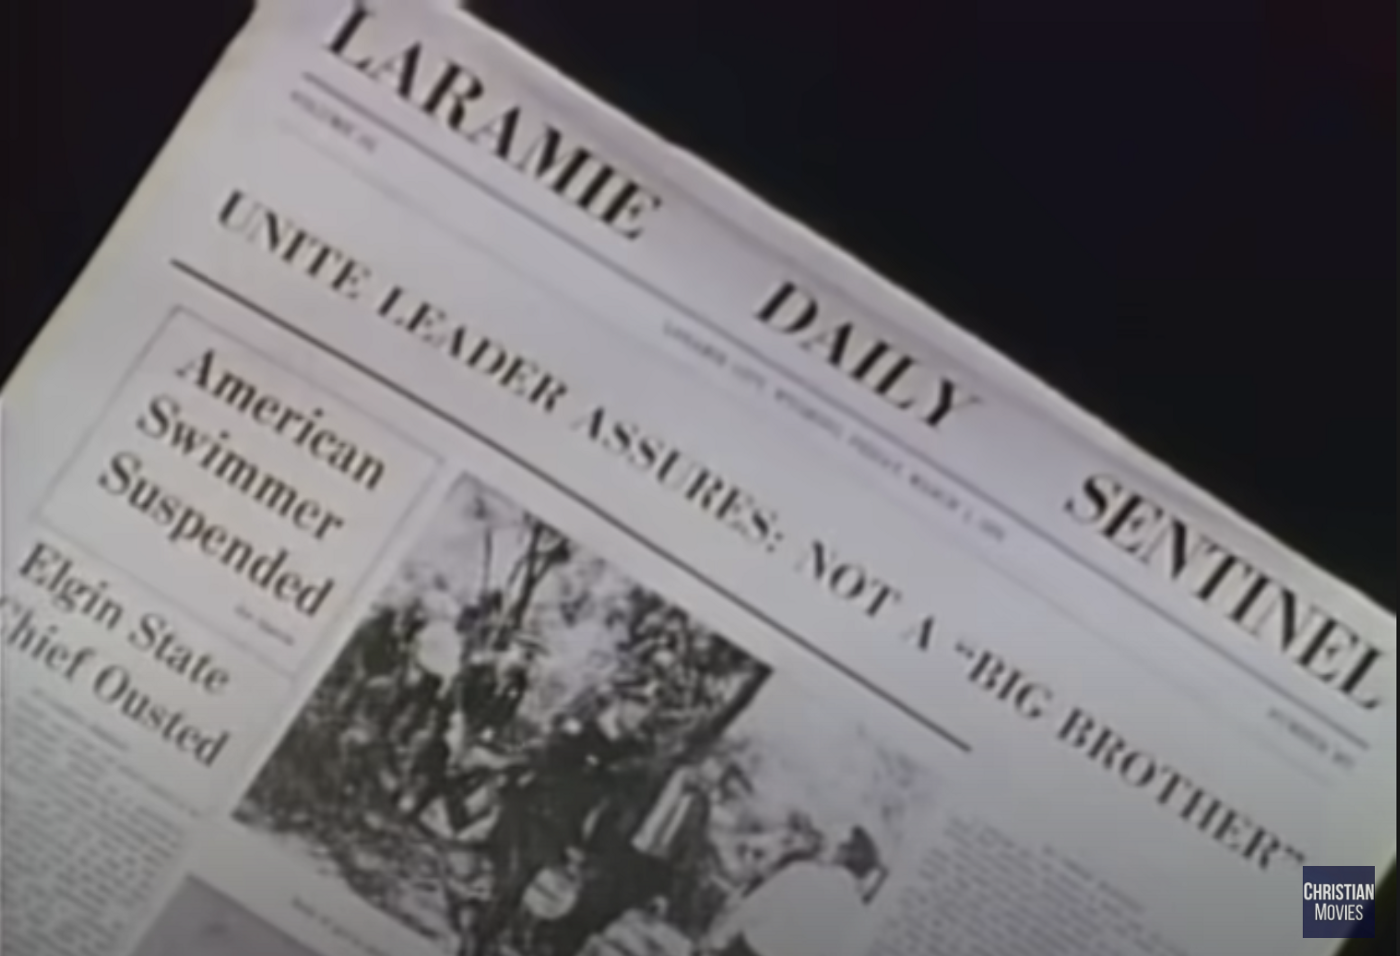 The Laramie Daily Sentinel newspaper with the headline "Unite Leader Assures: "Not a 'Big Brother.'"